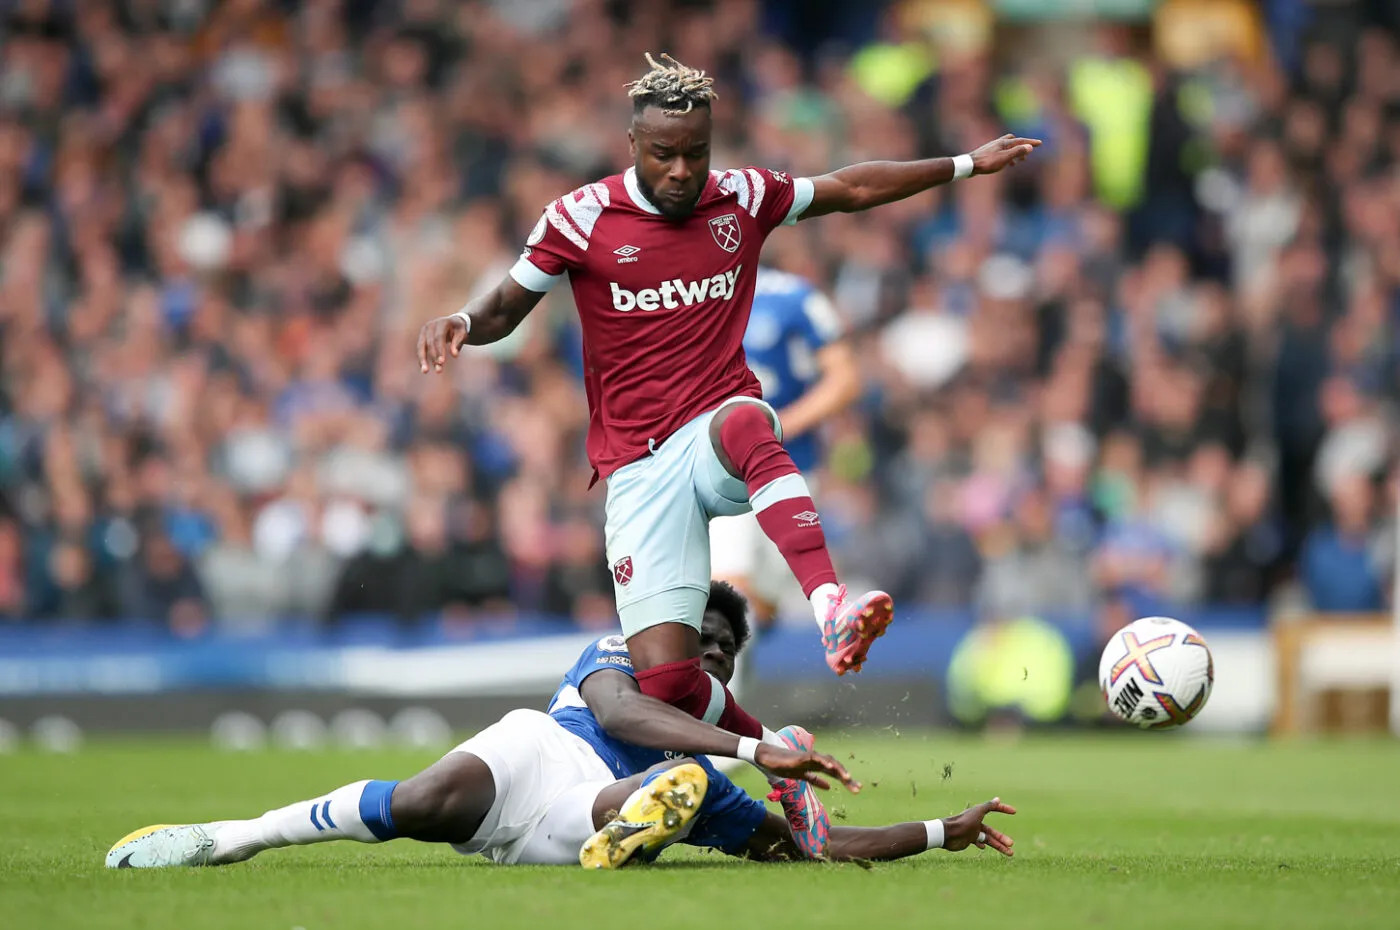 Everton's Amadou Onana (left) and West Ham United's Maxwel Cornet battle for the ball during the Premier League match at Goodison Park, Liverpool. Picture date: Sunday September 18, 2022. - Photo by Icon sport